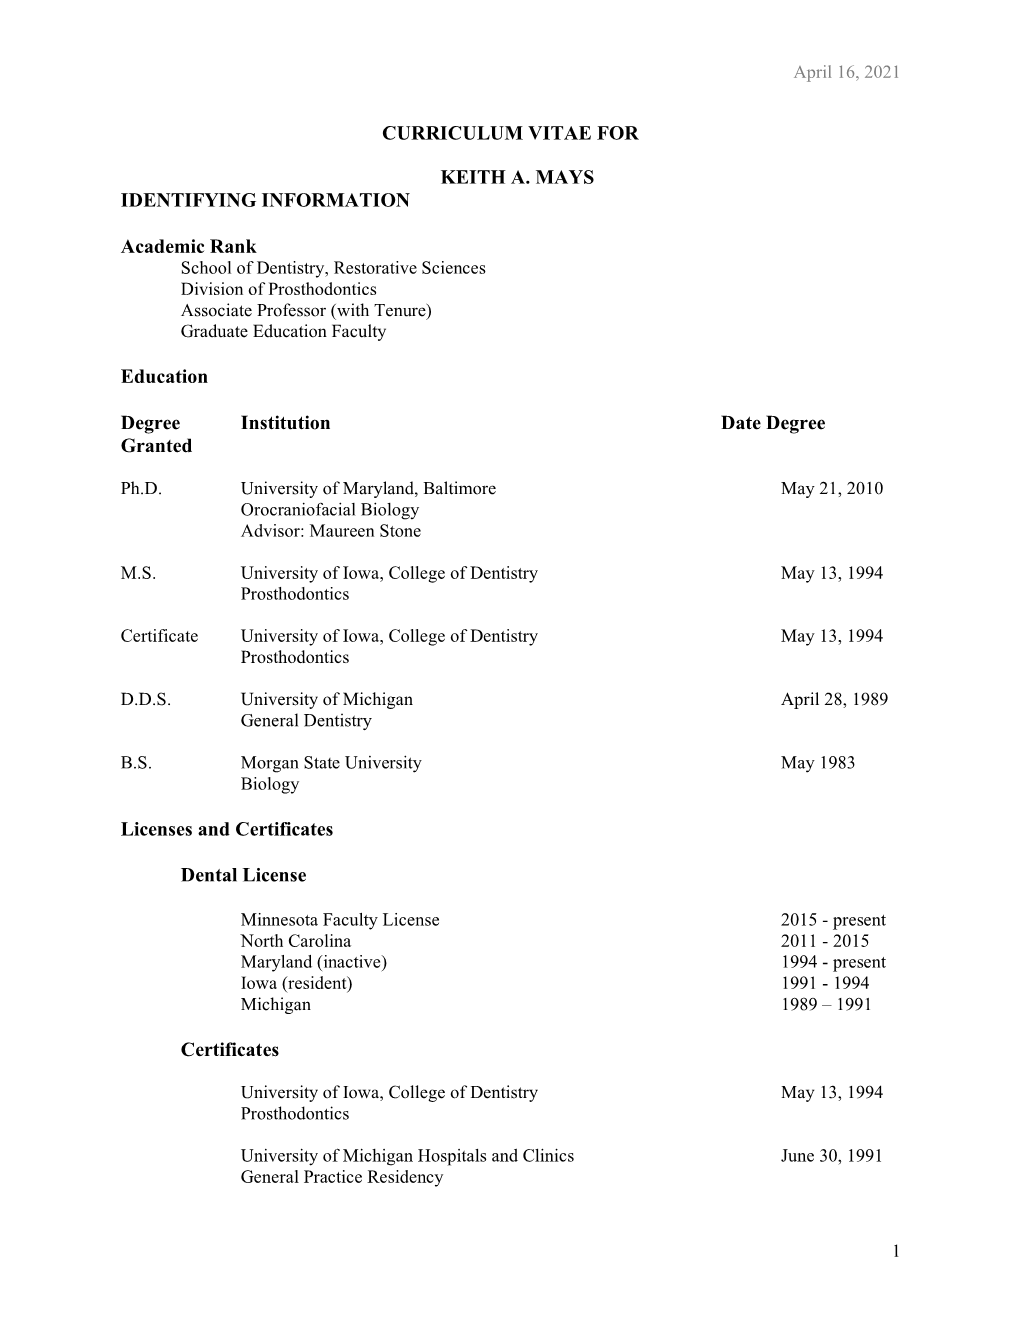 Curriculum Vitae for Keith A. Mays Identifying